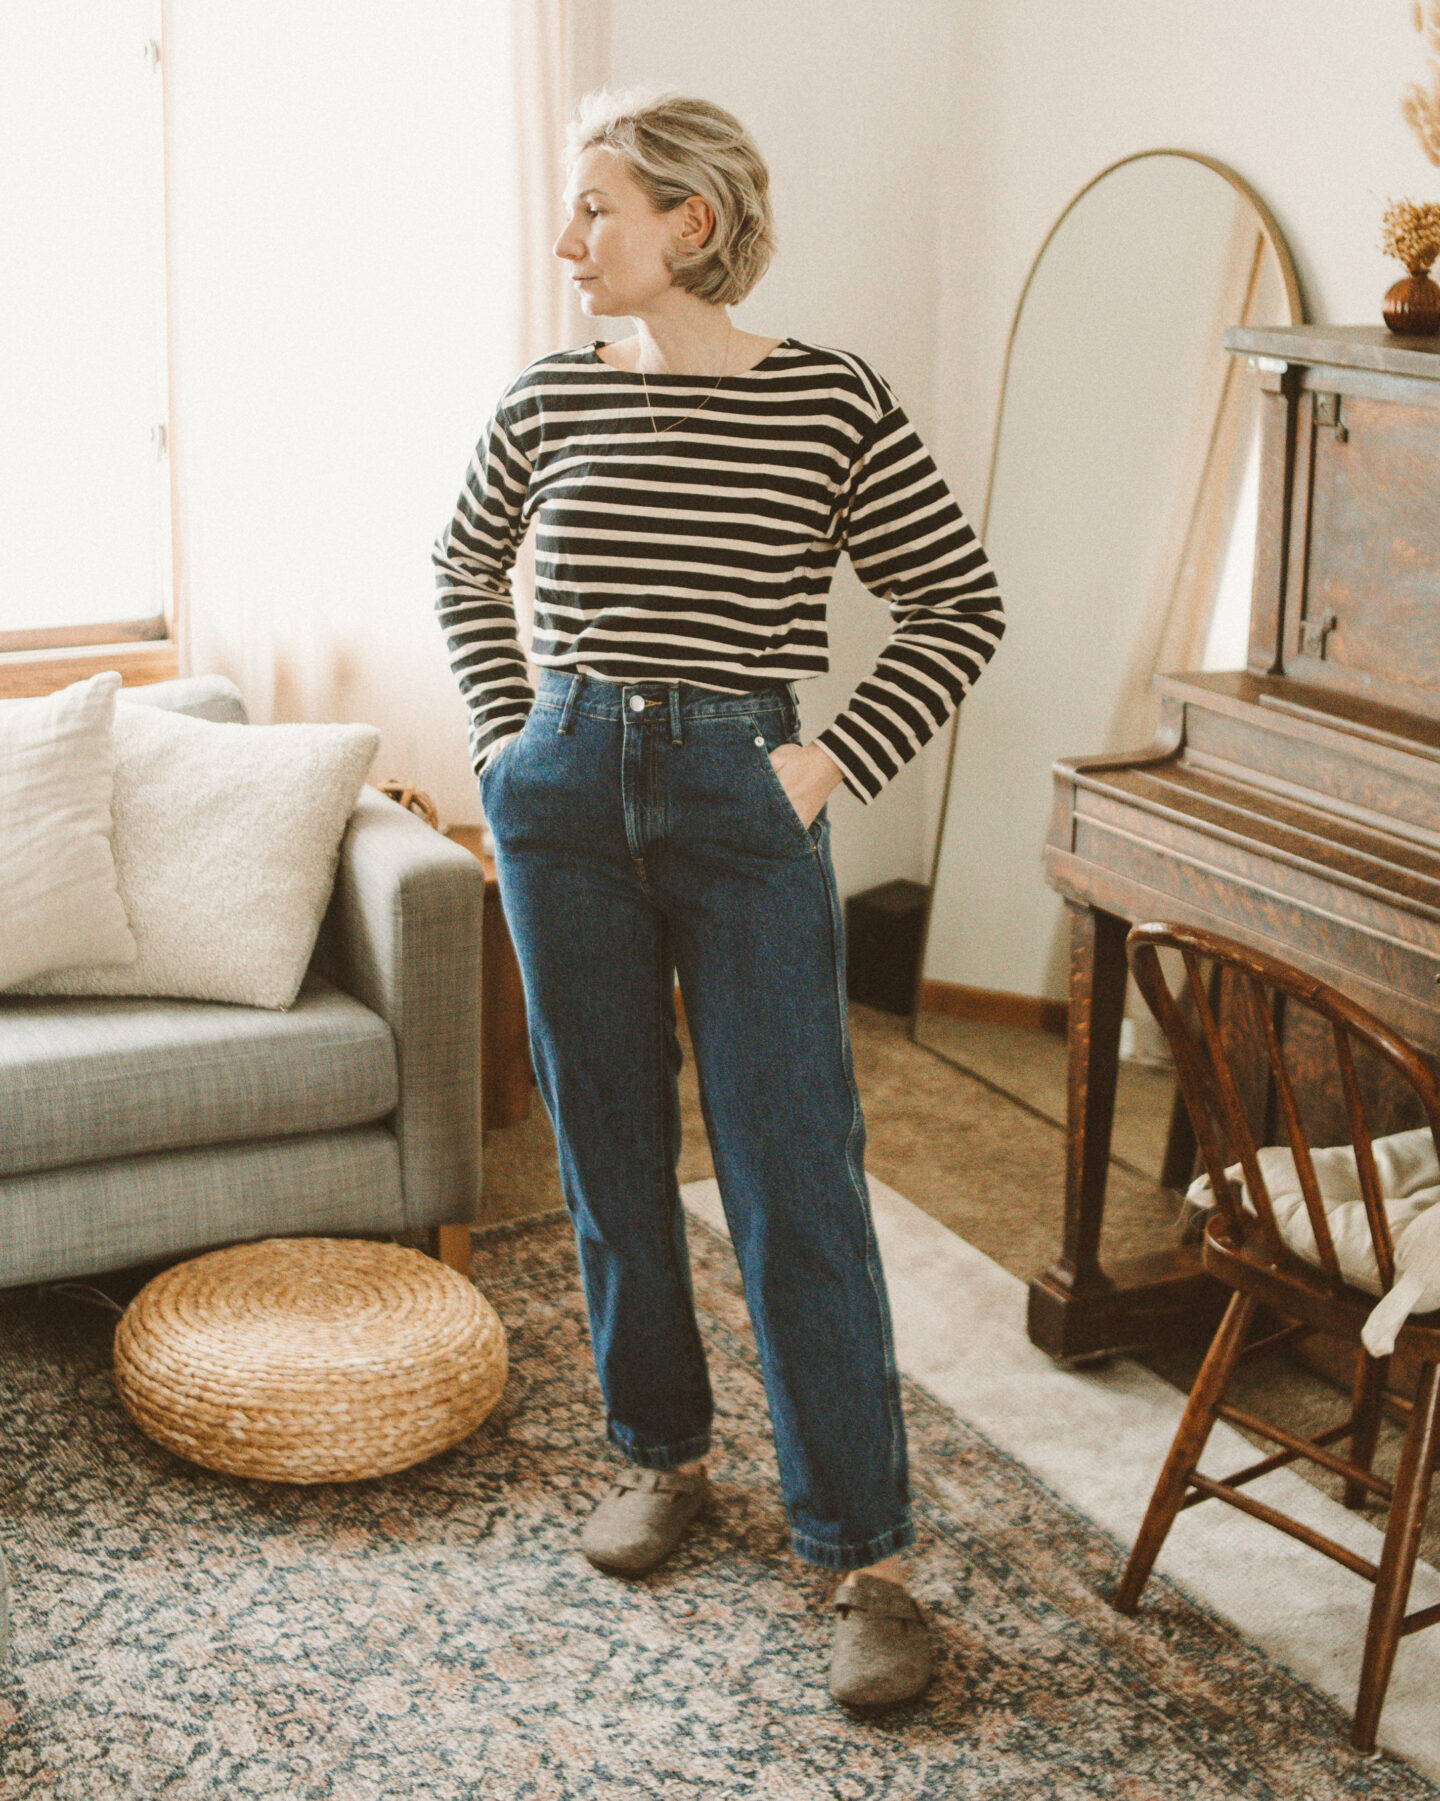 Karin Emily wears and reviews Everlane cinched waist jeans